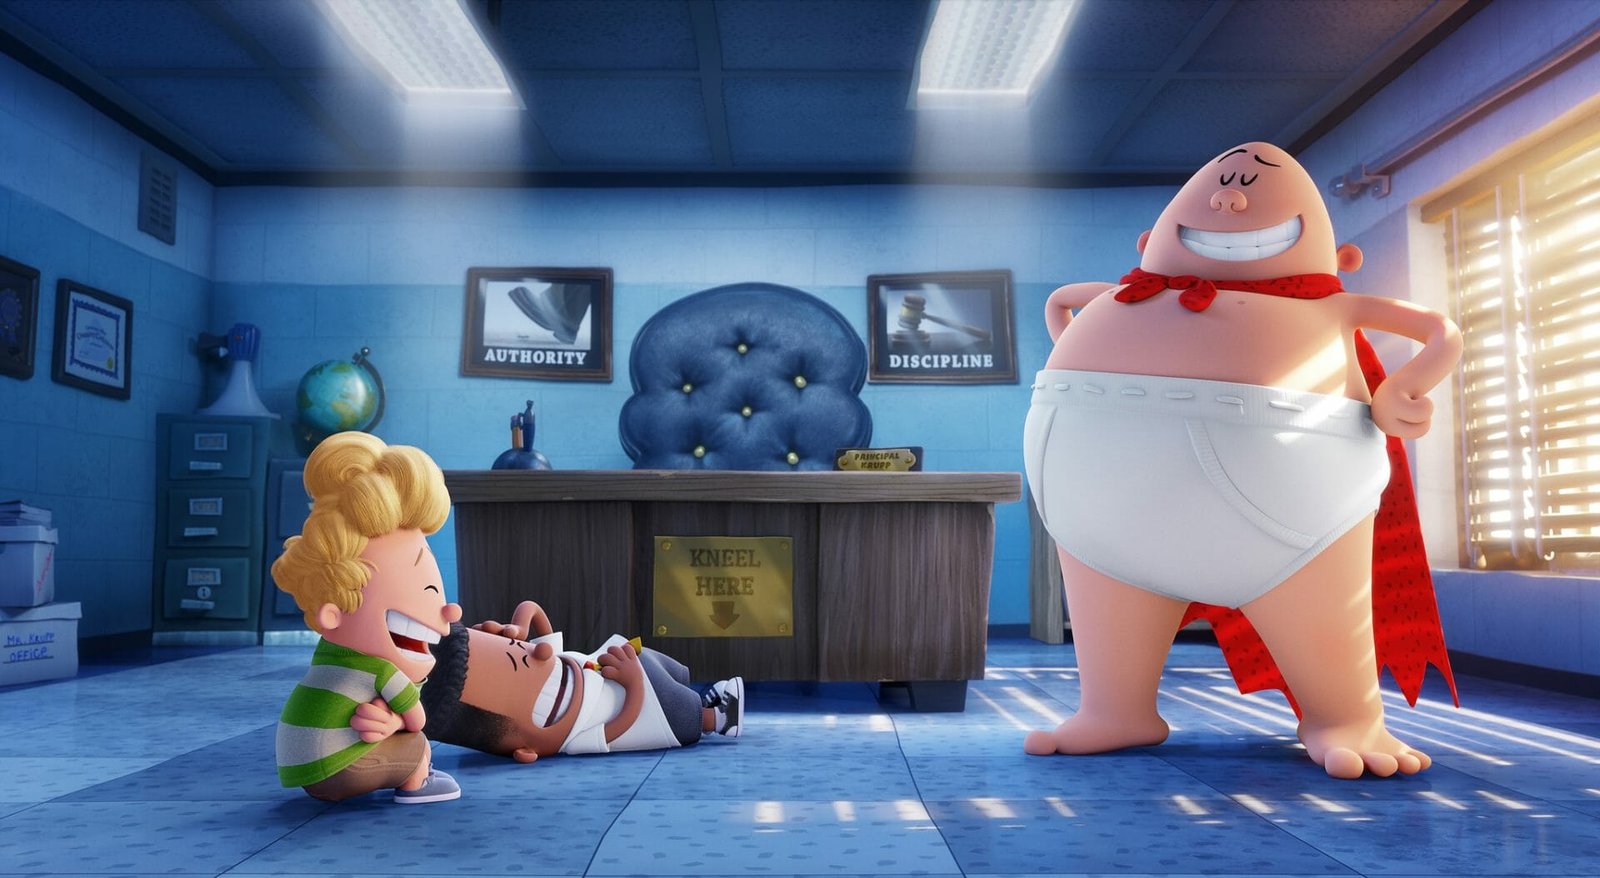 Dreamwork movies: Captain Underpants: The First Epic Movie